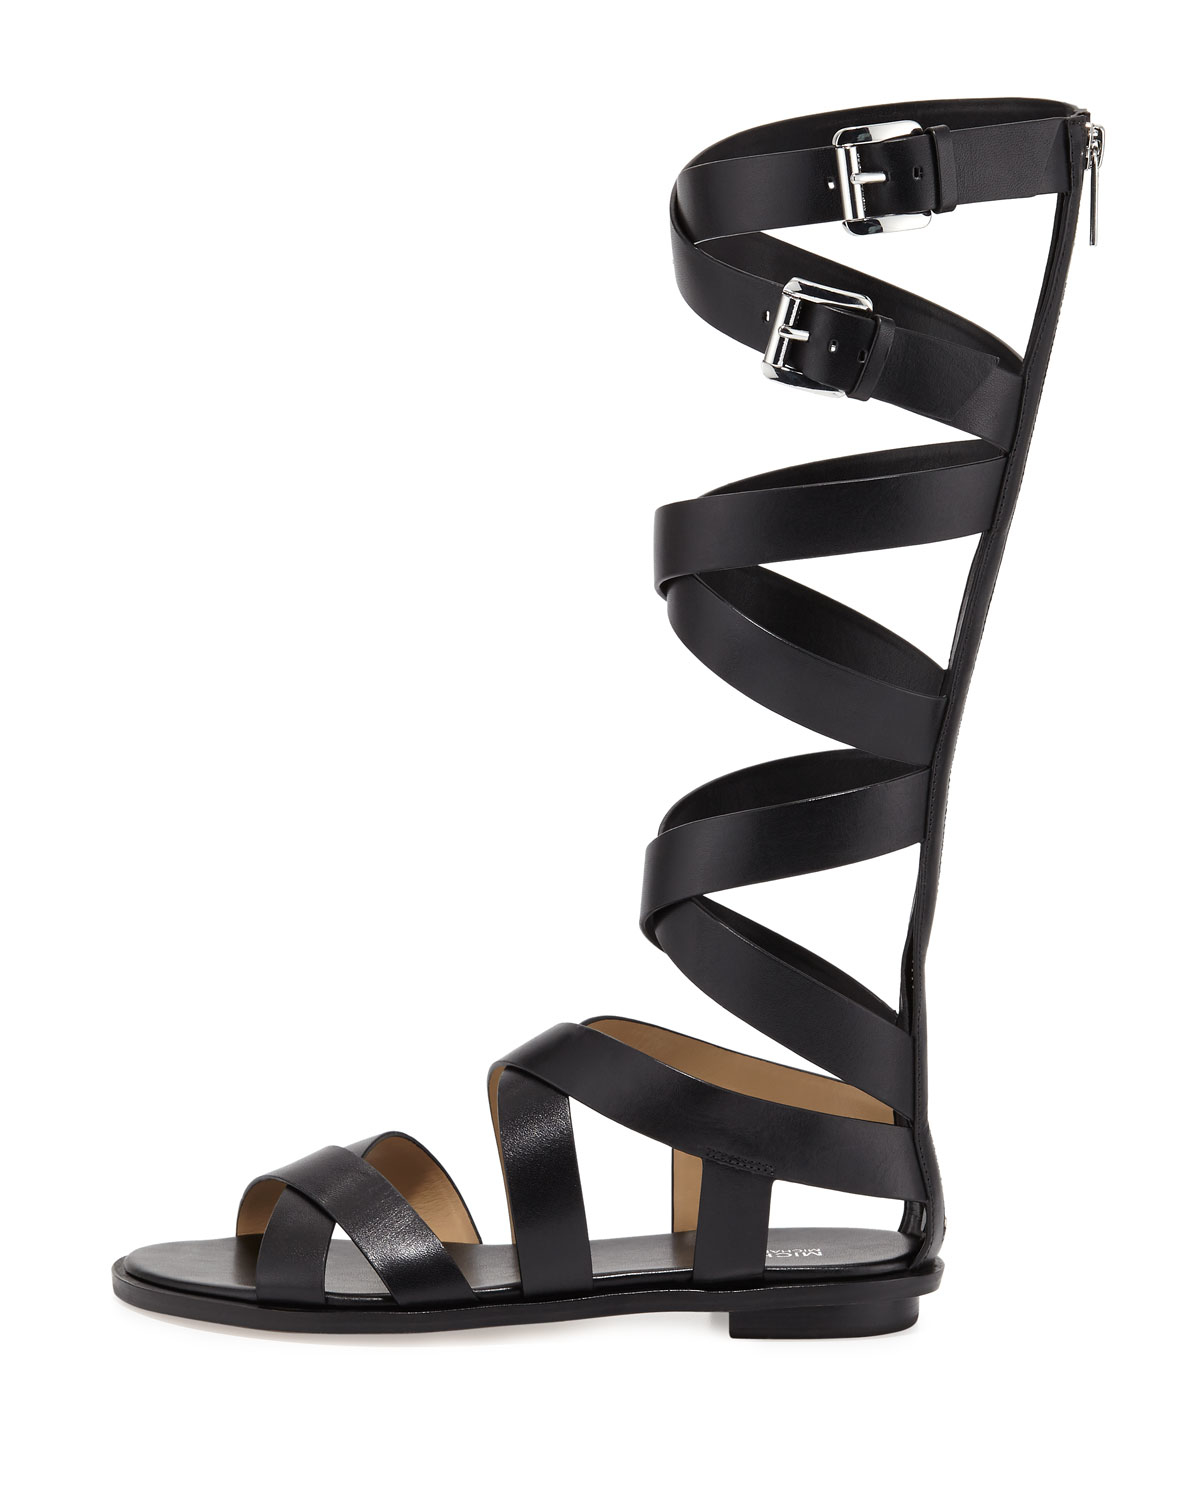 MICHAEL Michael Kors Darby Leather Gladiator Sandals in Black - Lyst